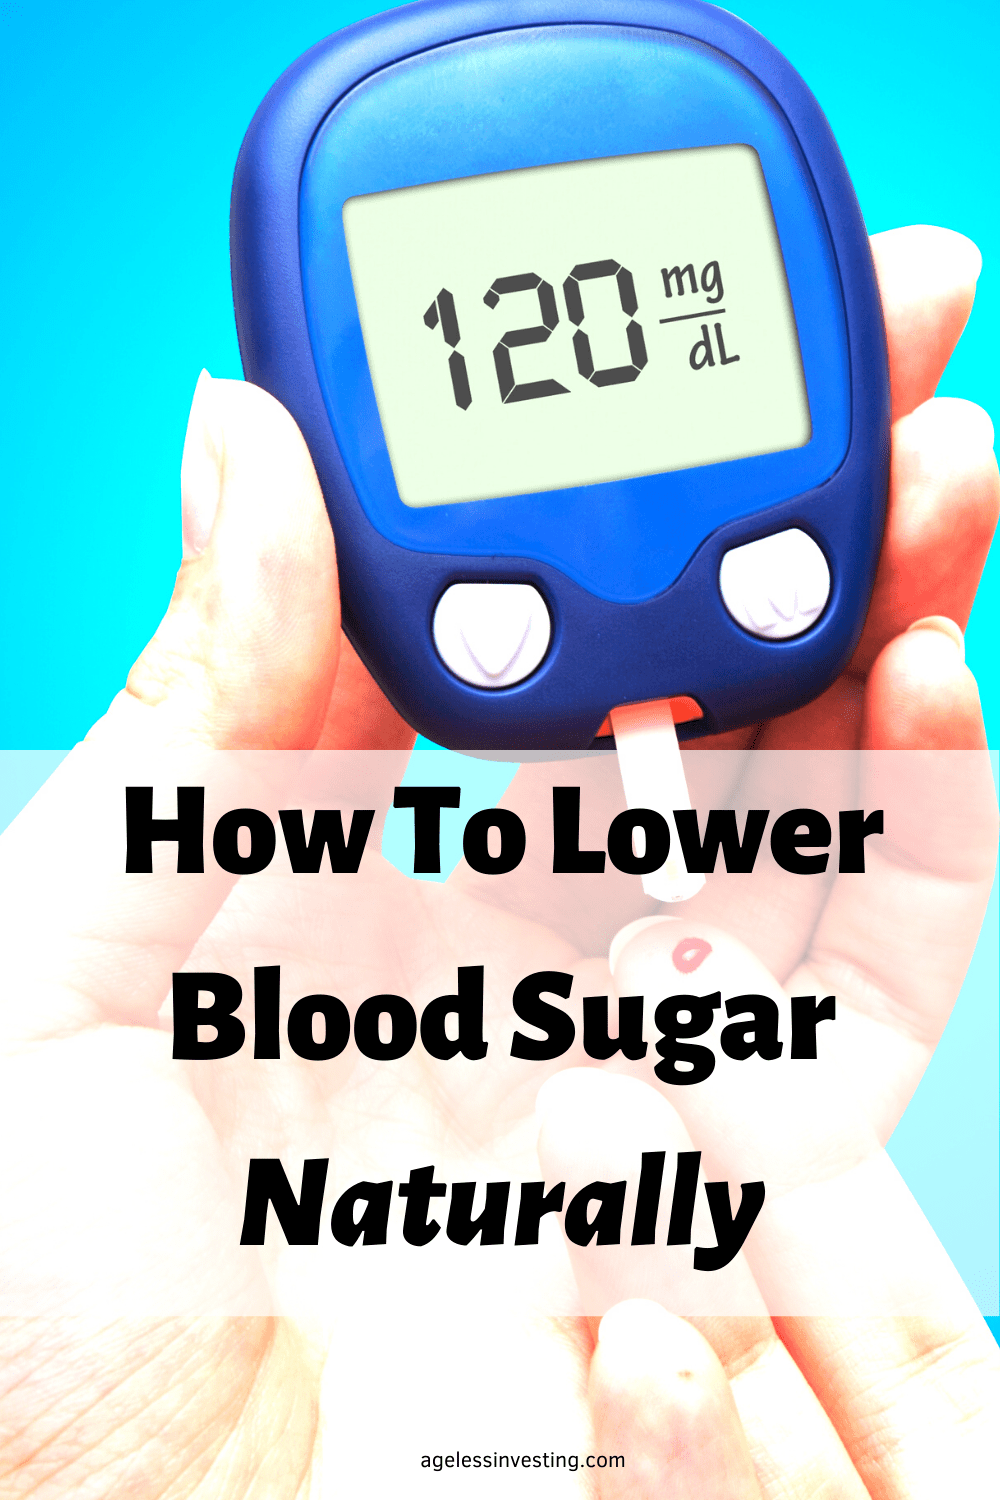 How To Lower Blood Sugar Without Insulin